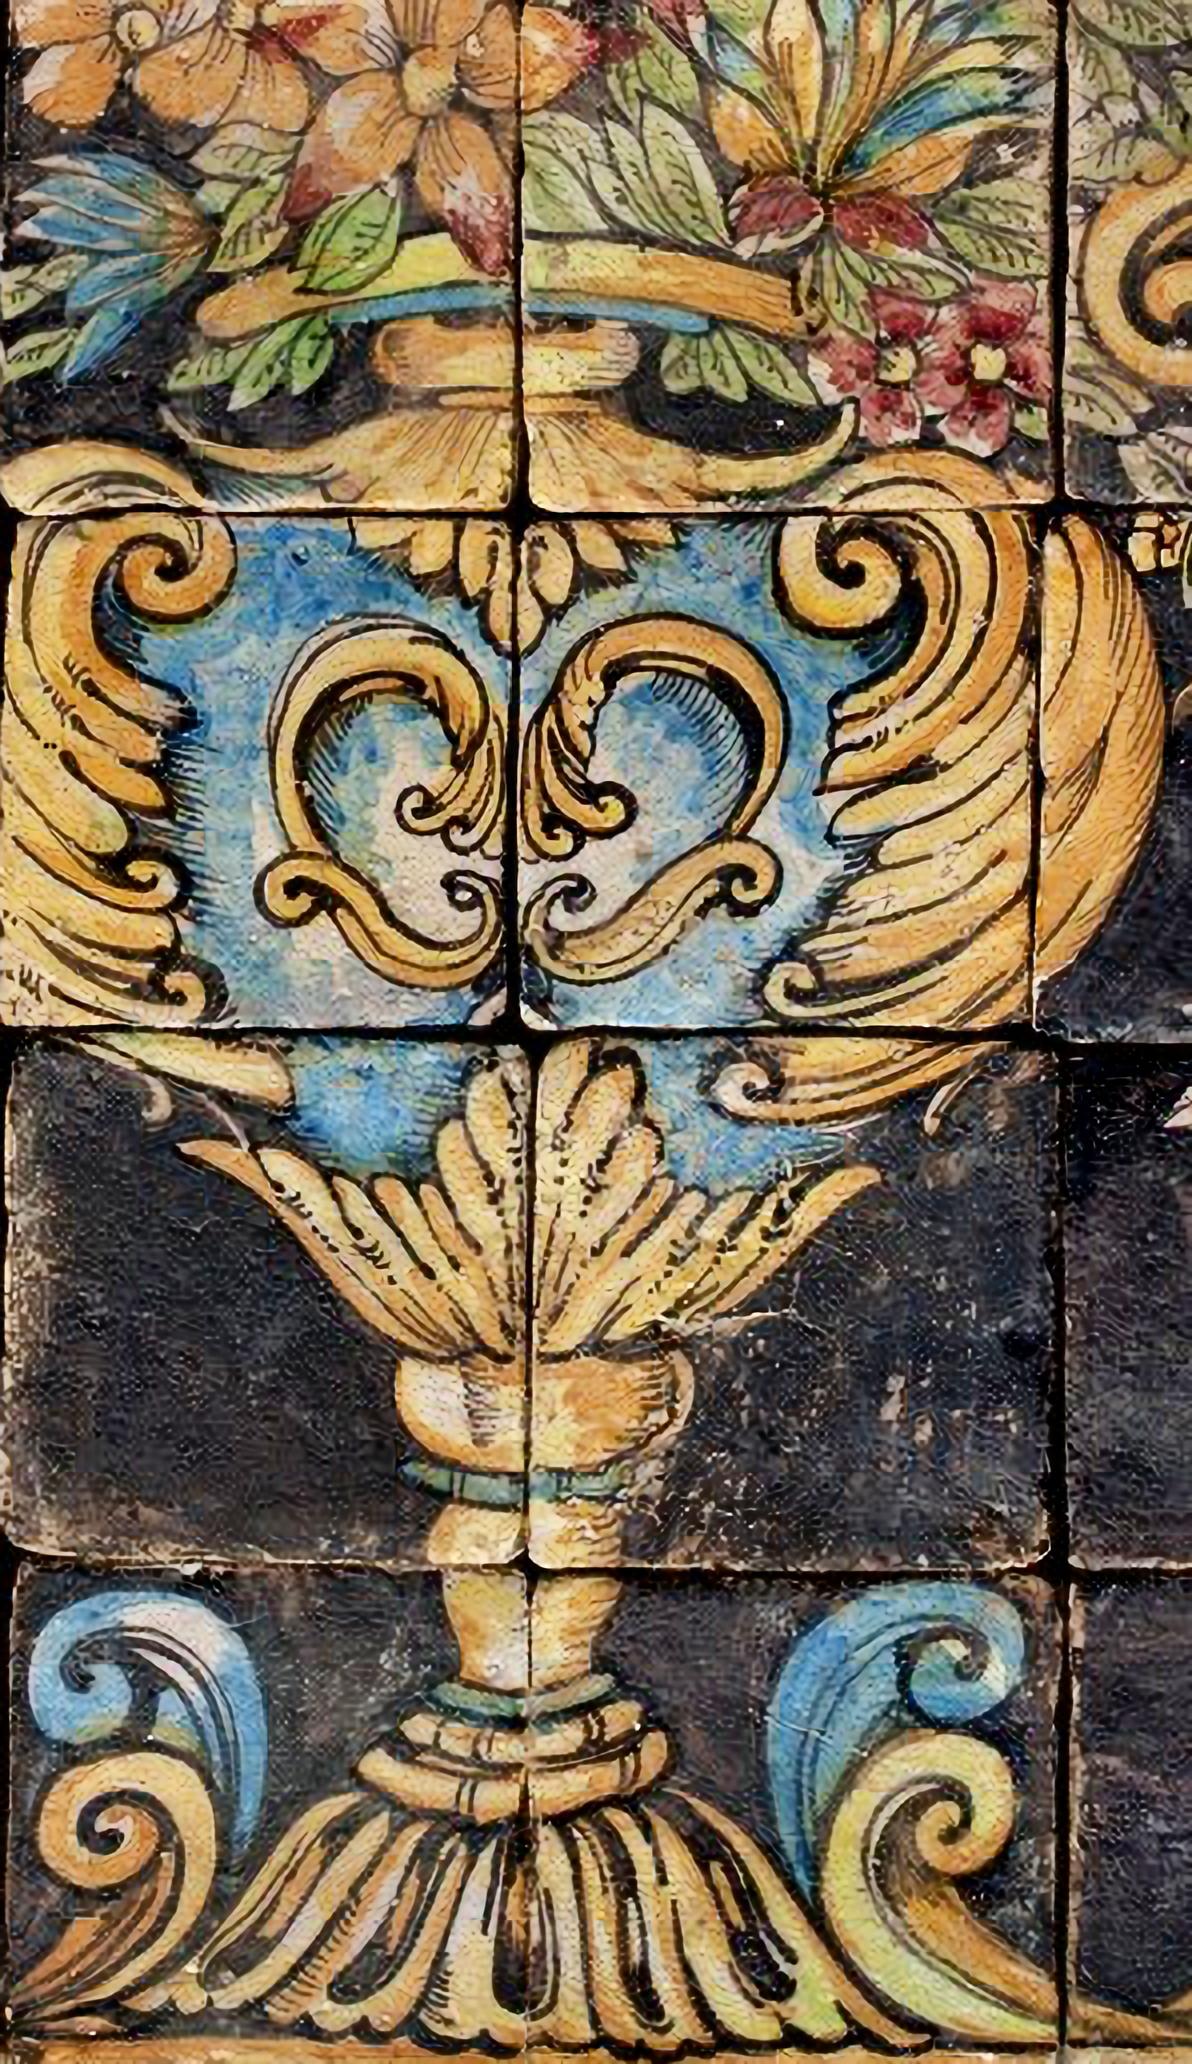 SICILIAN MAJOLICA PANEL end 19th Century

Panel made with 36 tiles measuring 17x17 cm.
Panel of classic Sicilian Baroque inspiration.

HEIGHT 102 cm
WIDTH 102 cm
THICKNESS 1.2 cm
WEIGHT 20 Kg
MATERIAL Majolica on handmade biscuit.